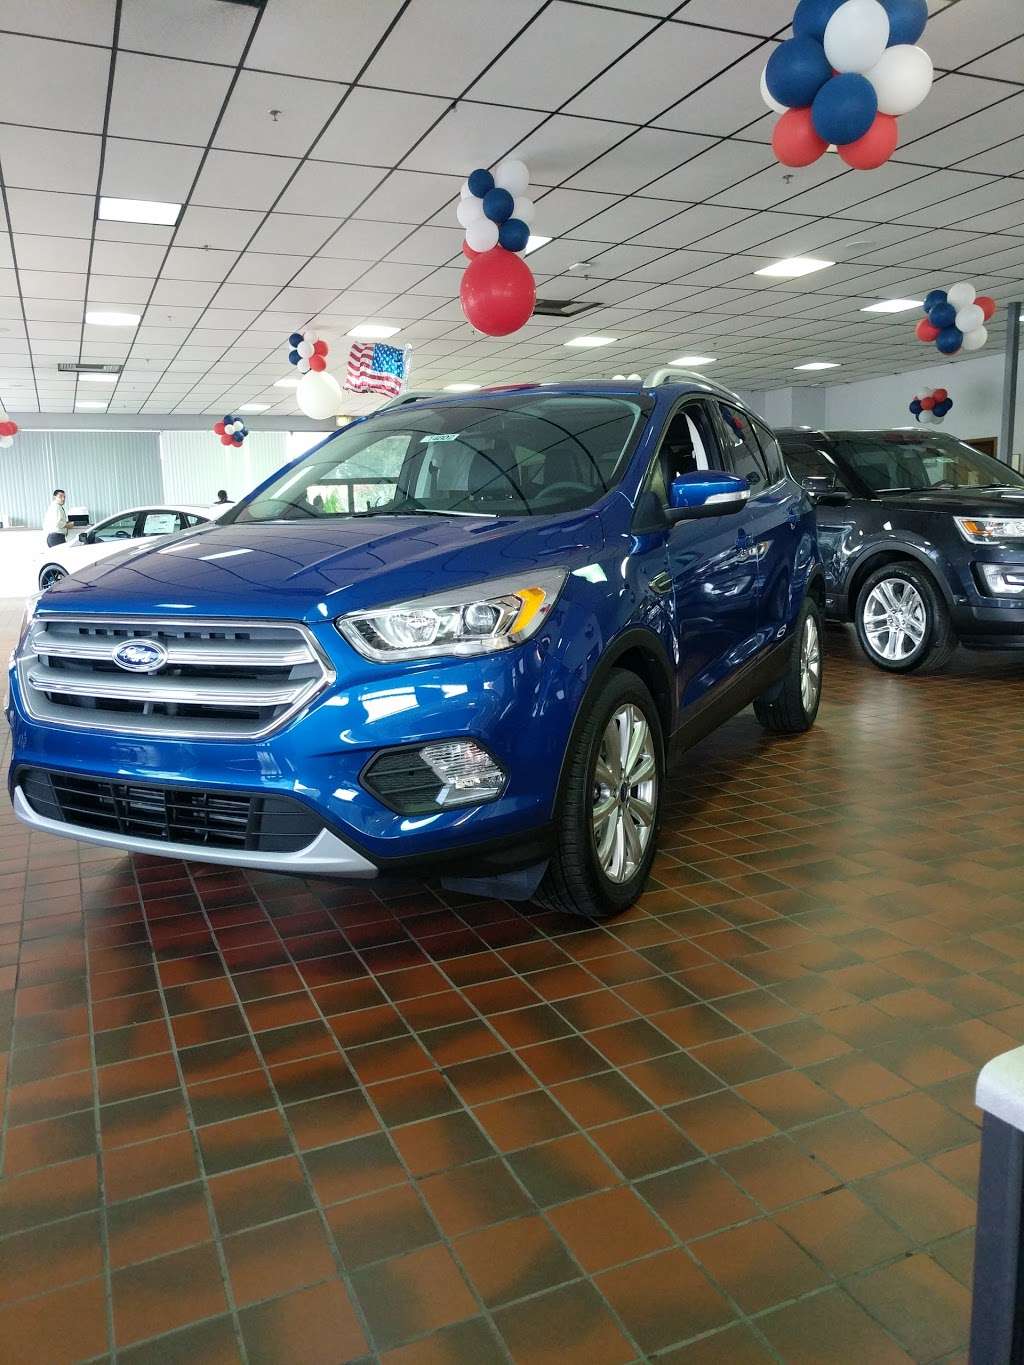 Currie Motors Ford of Valpo | 2052 W Morthland Dr, Valparaiso, IN 46385 | Phone: (219) 336-1373